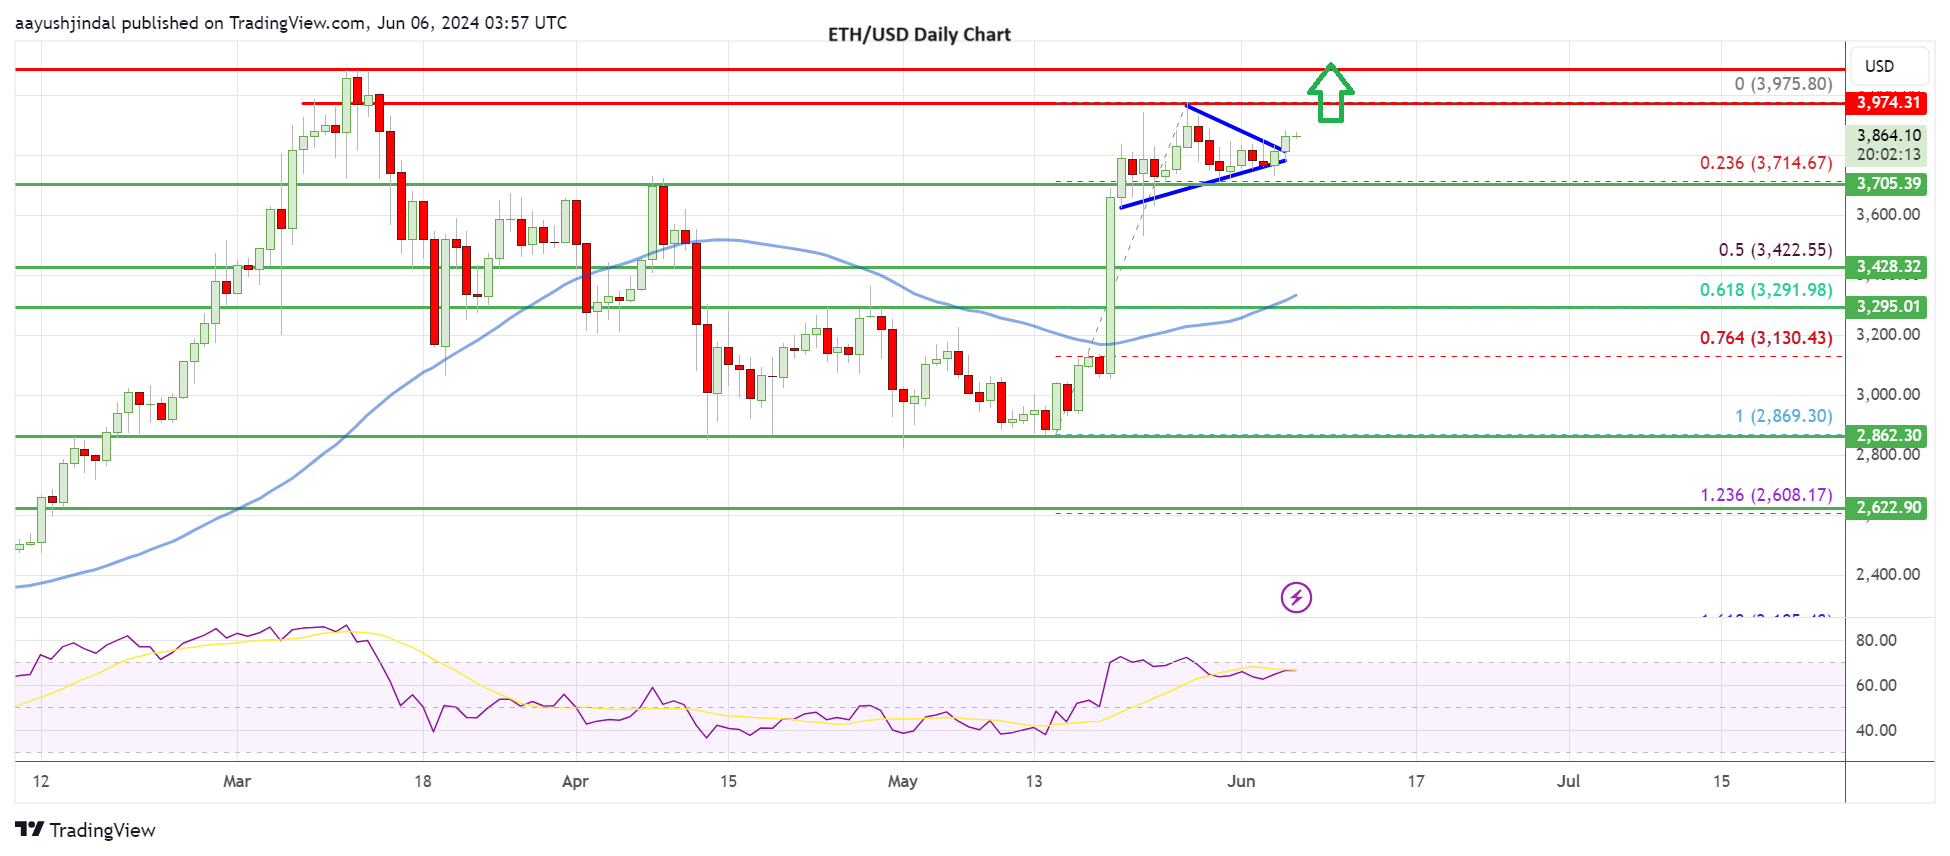 Ethereum price daily chart | Source: ETH/USD on TradingView.com